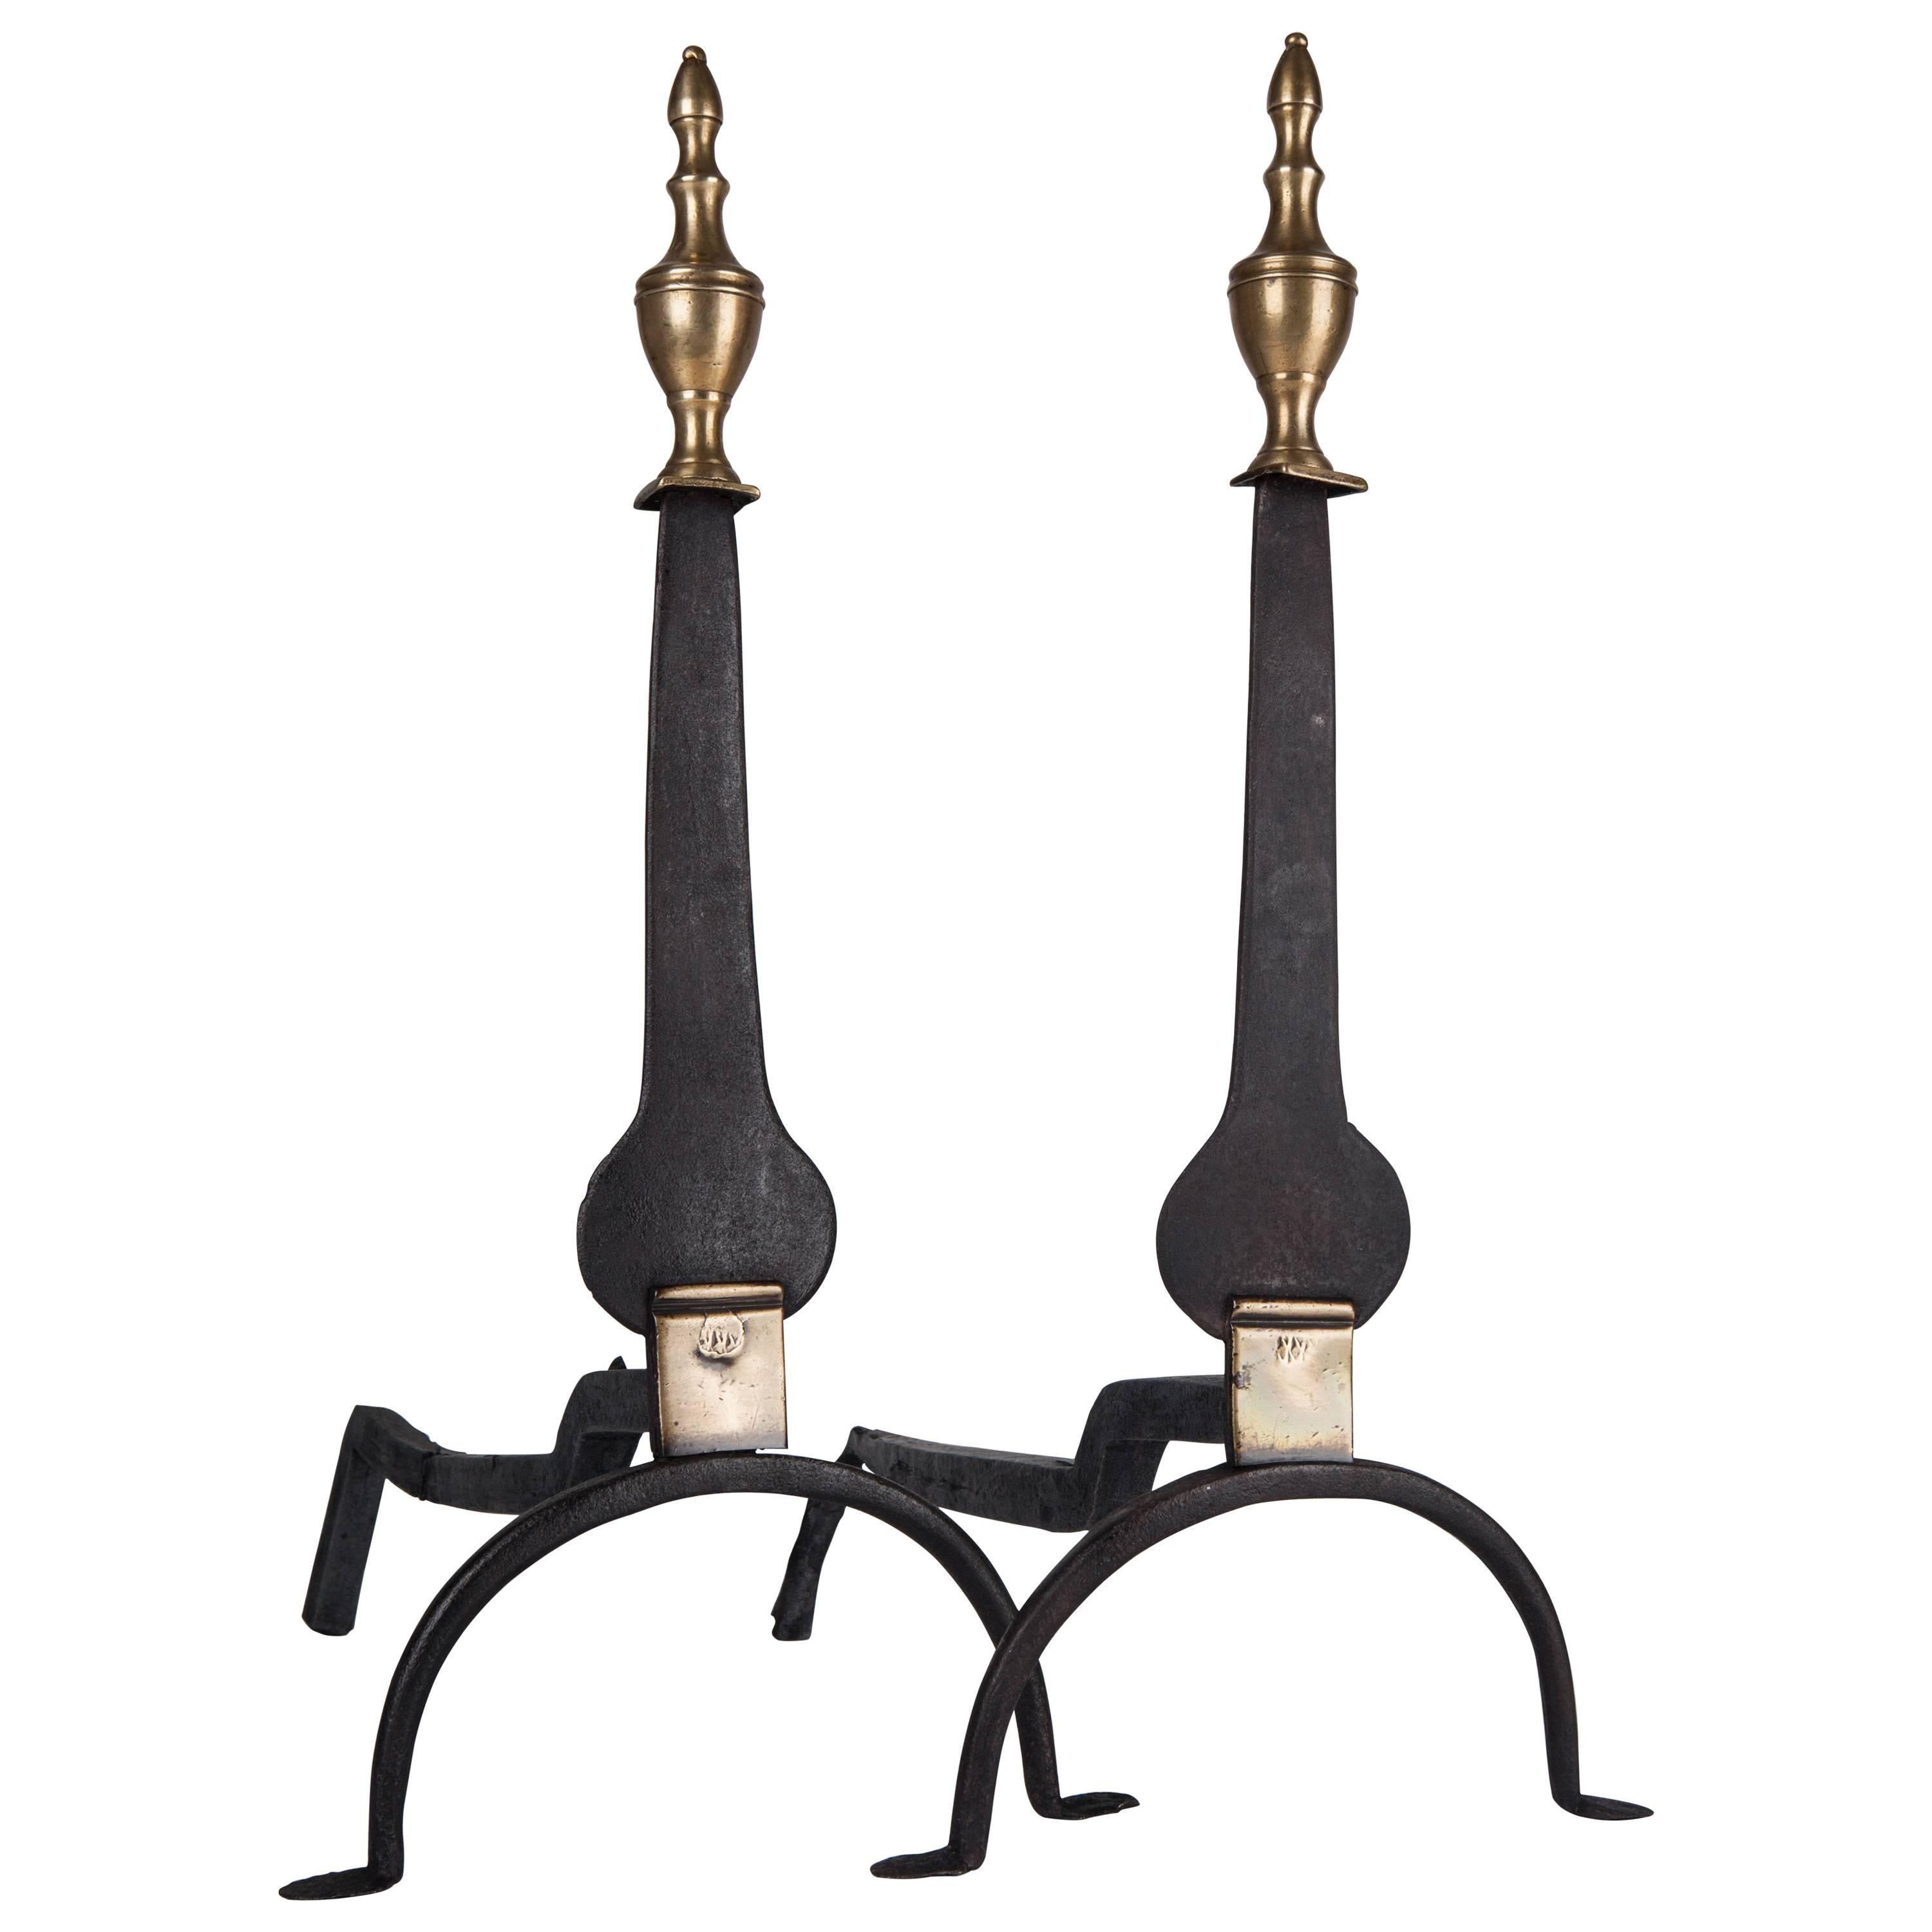 Blackened Wrought Iron Knife Blade Andirons with Brass Urn Finials, Circa 1900s